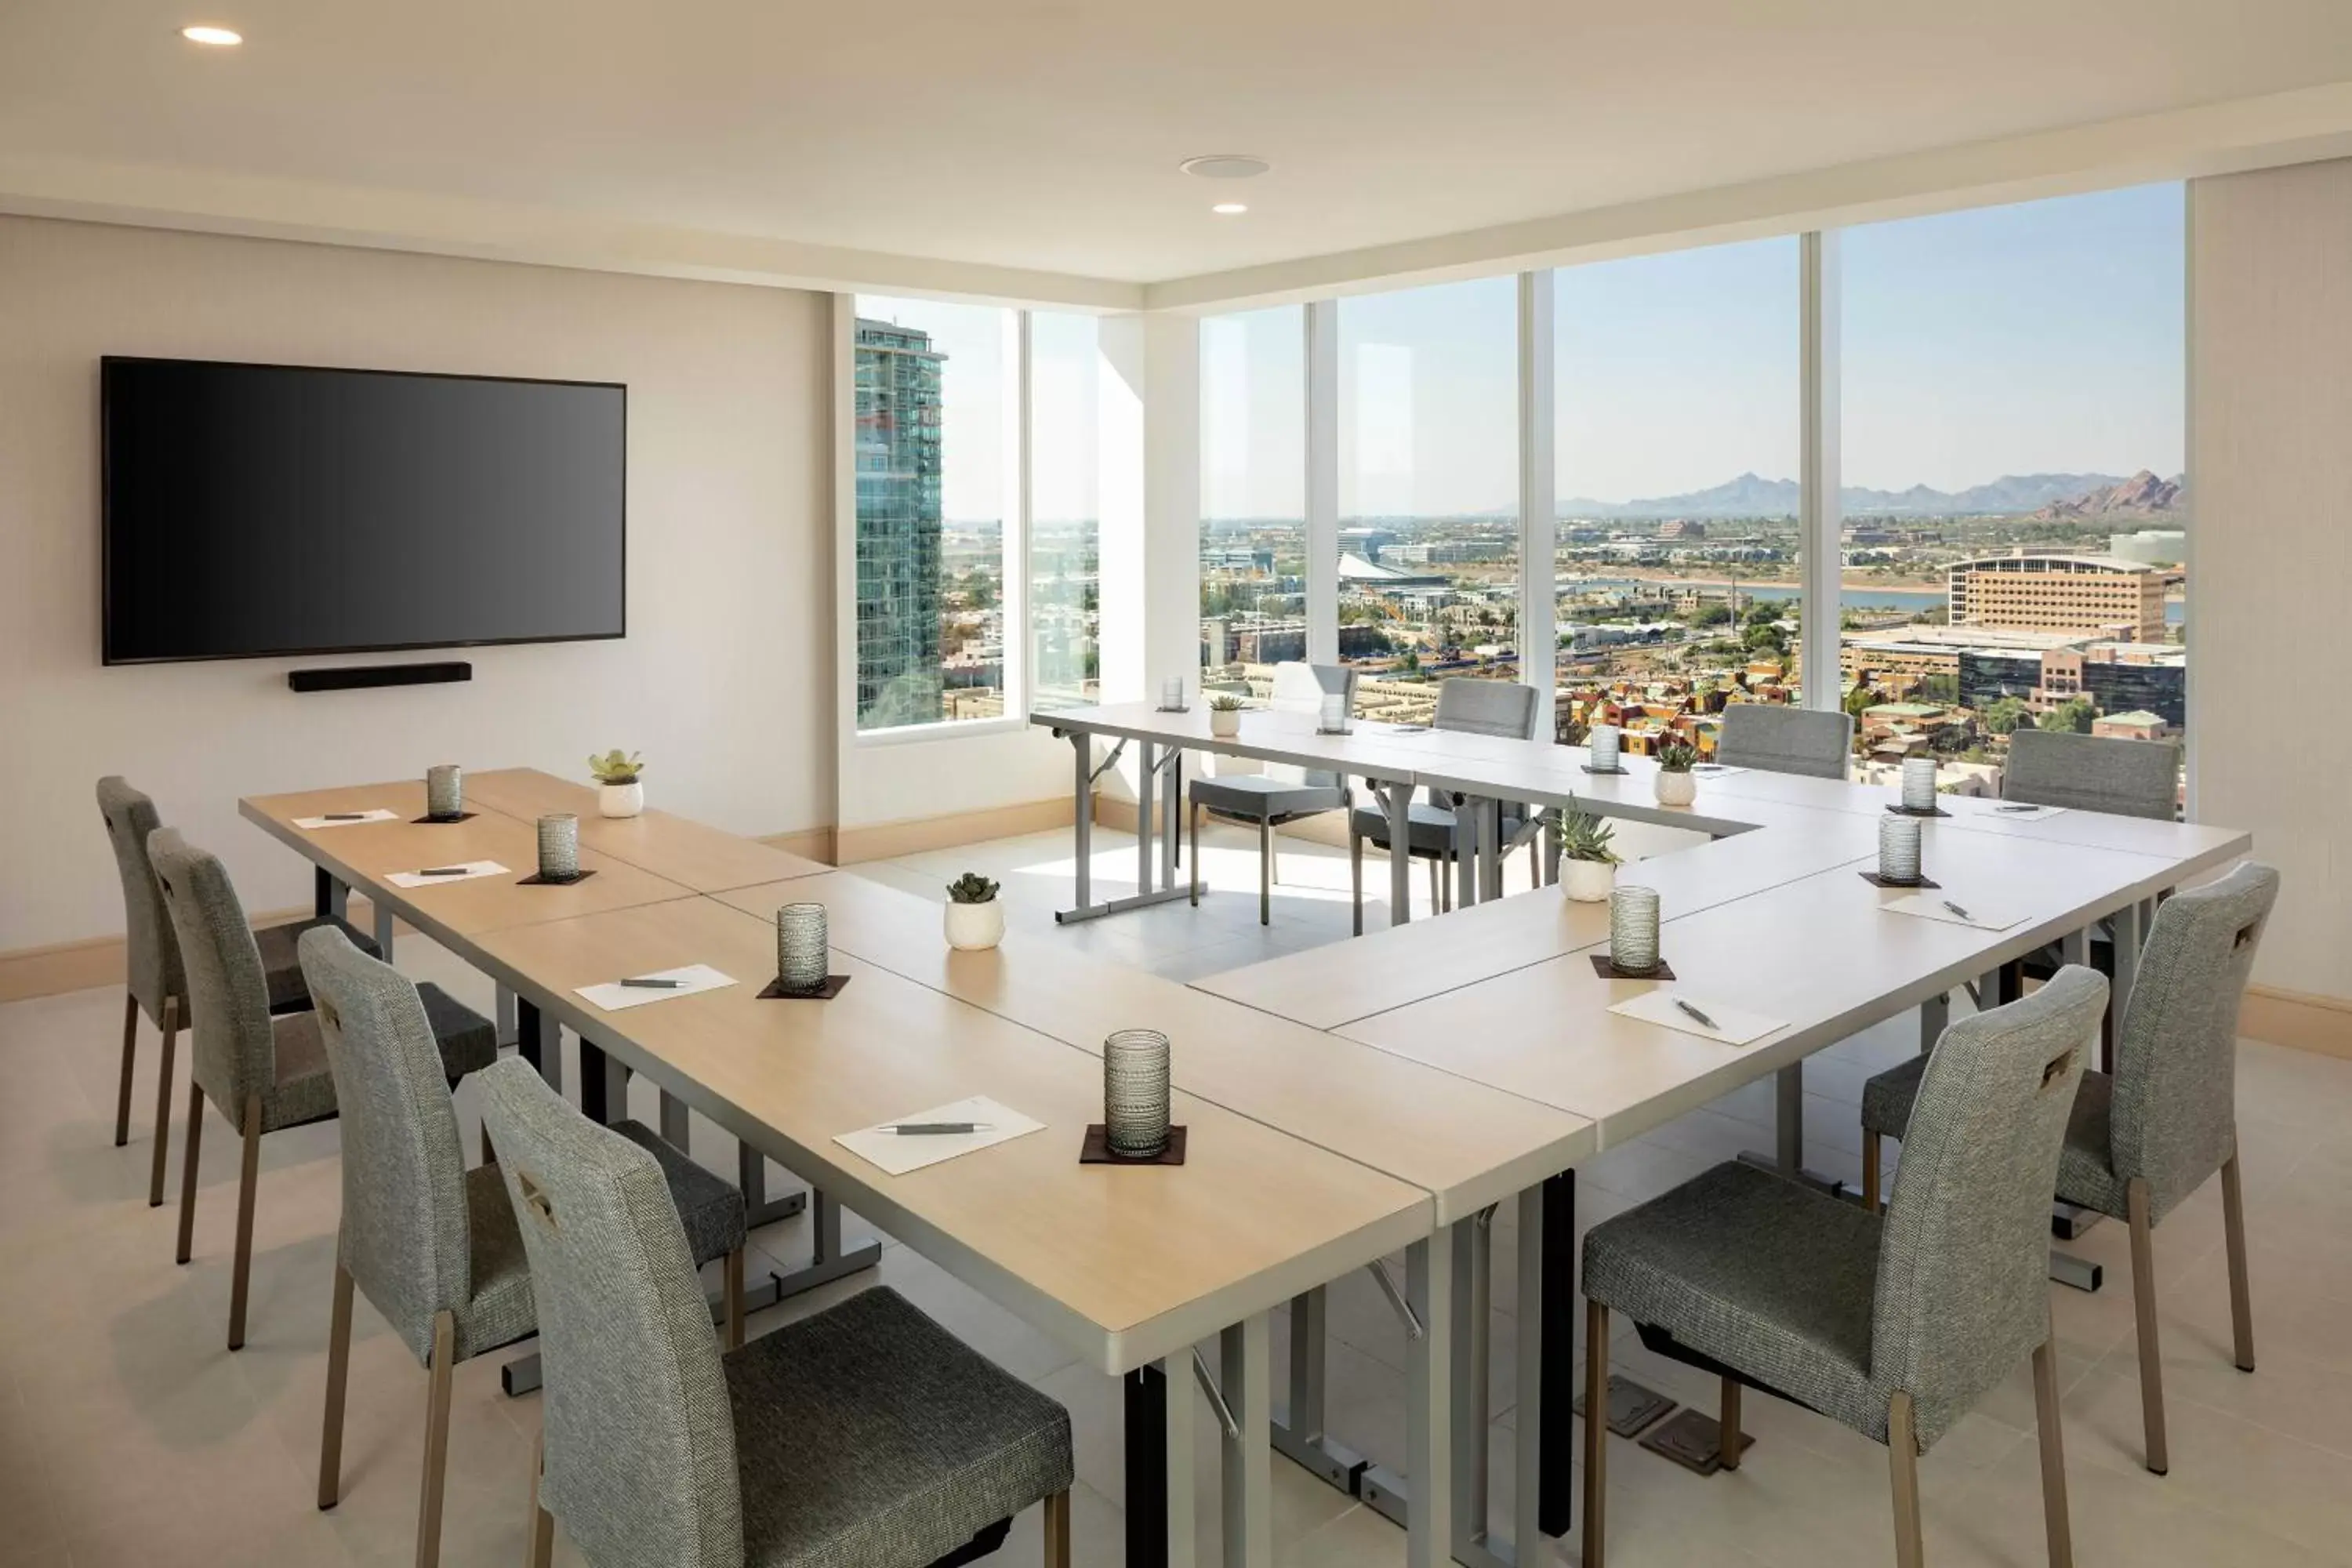 Meeting/conference room in The Westin Tempe